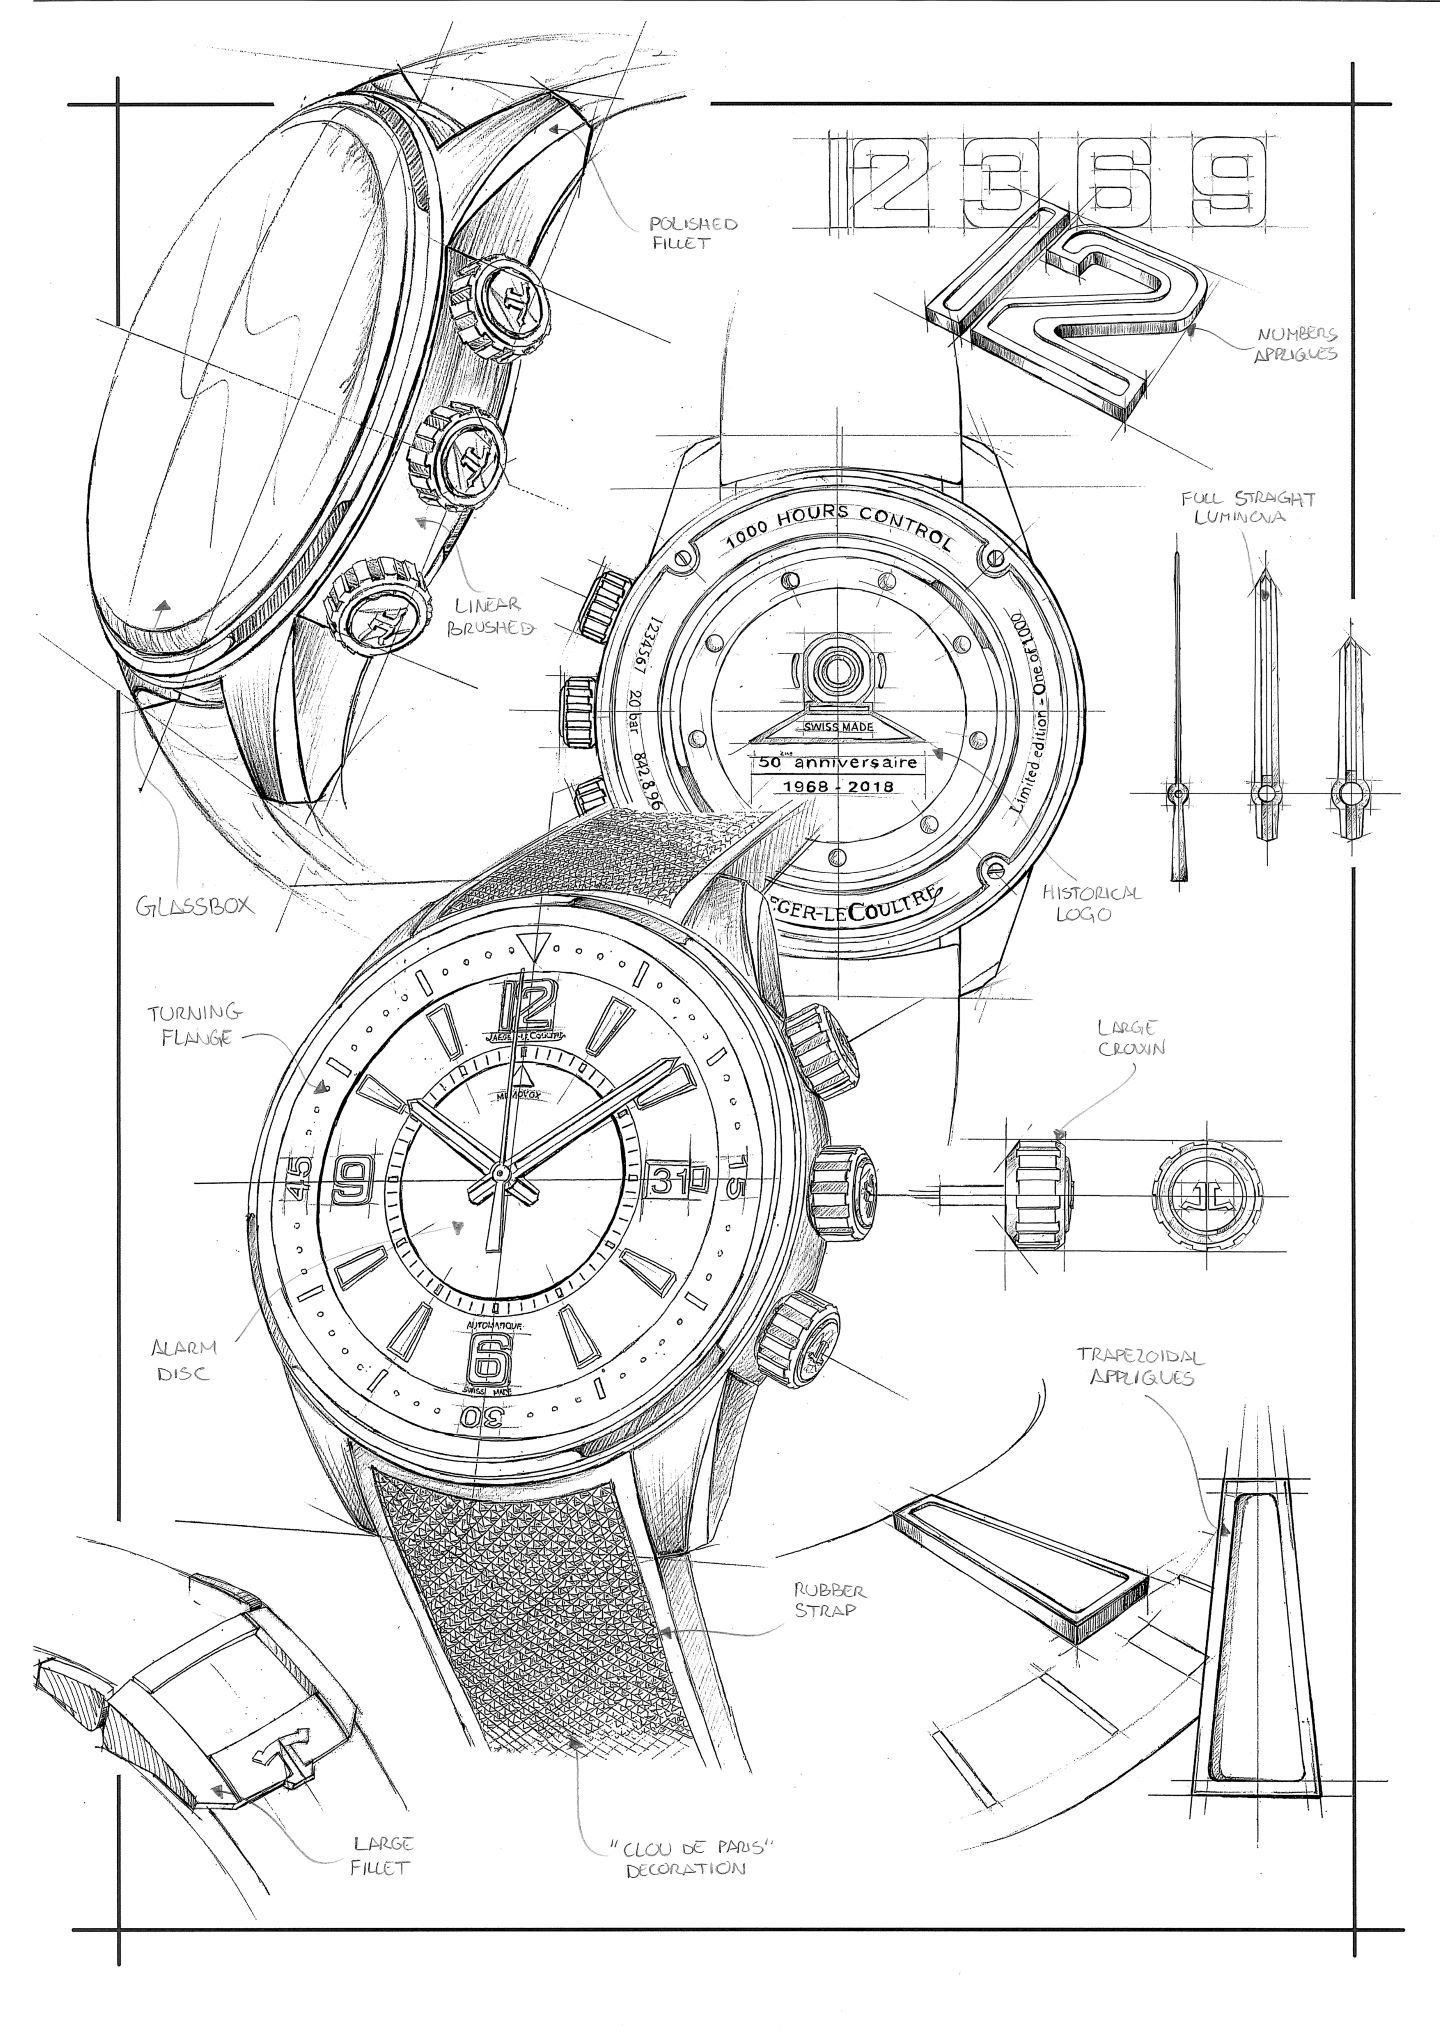 Jaeger-Lecoultre Polaris Memovox drawing by Product Design Director Lionel Favre